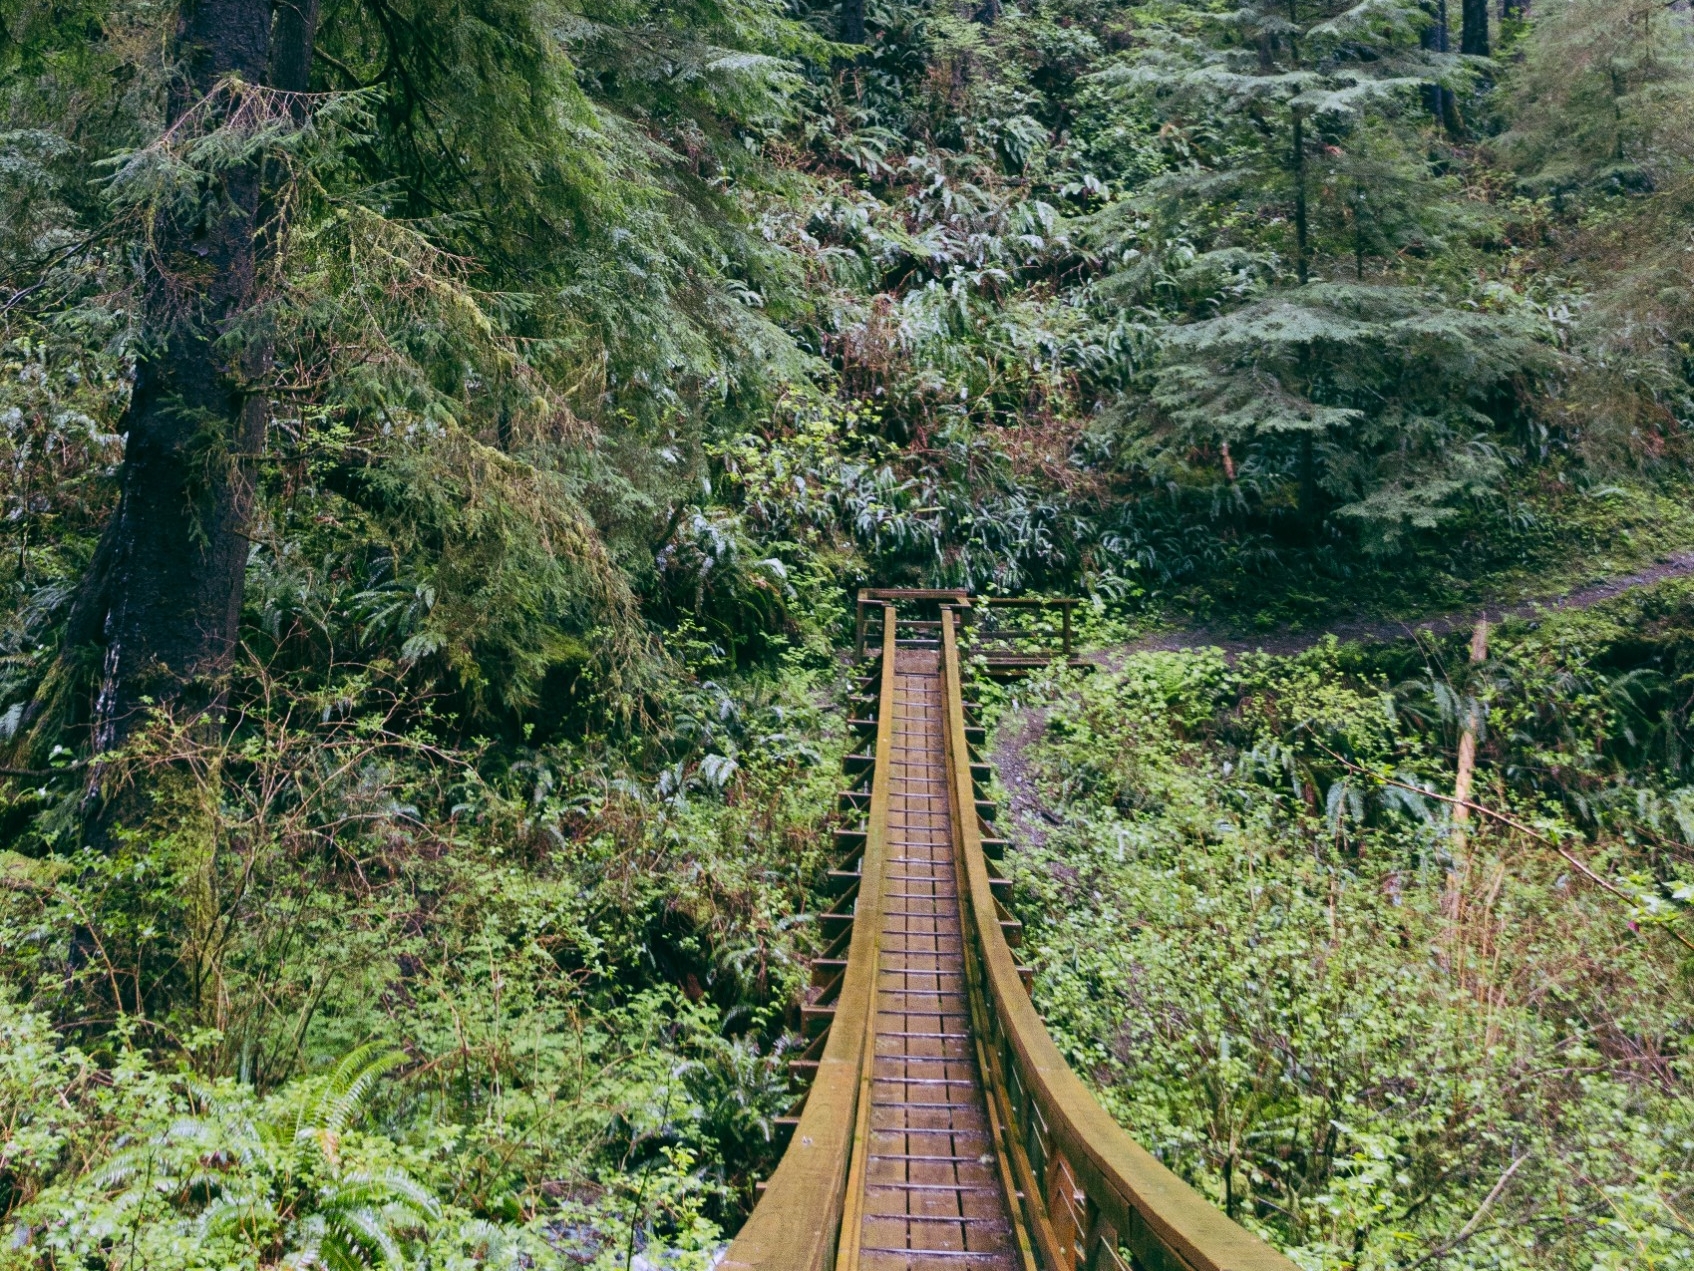 Suspension bridge made in the forest